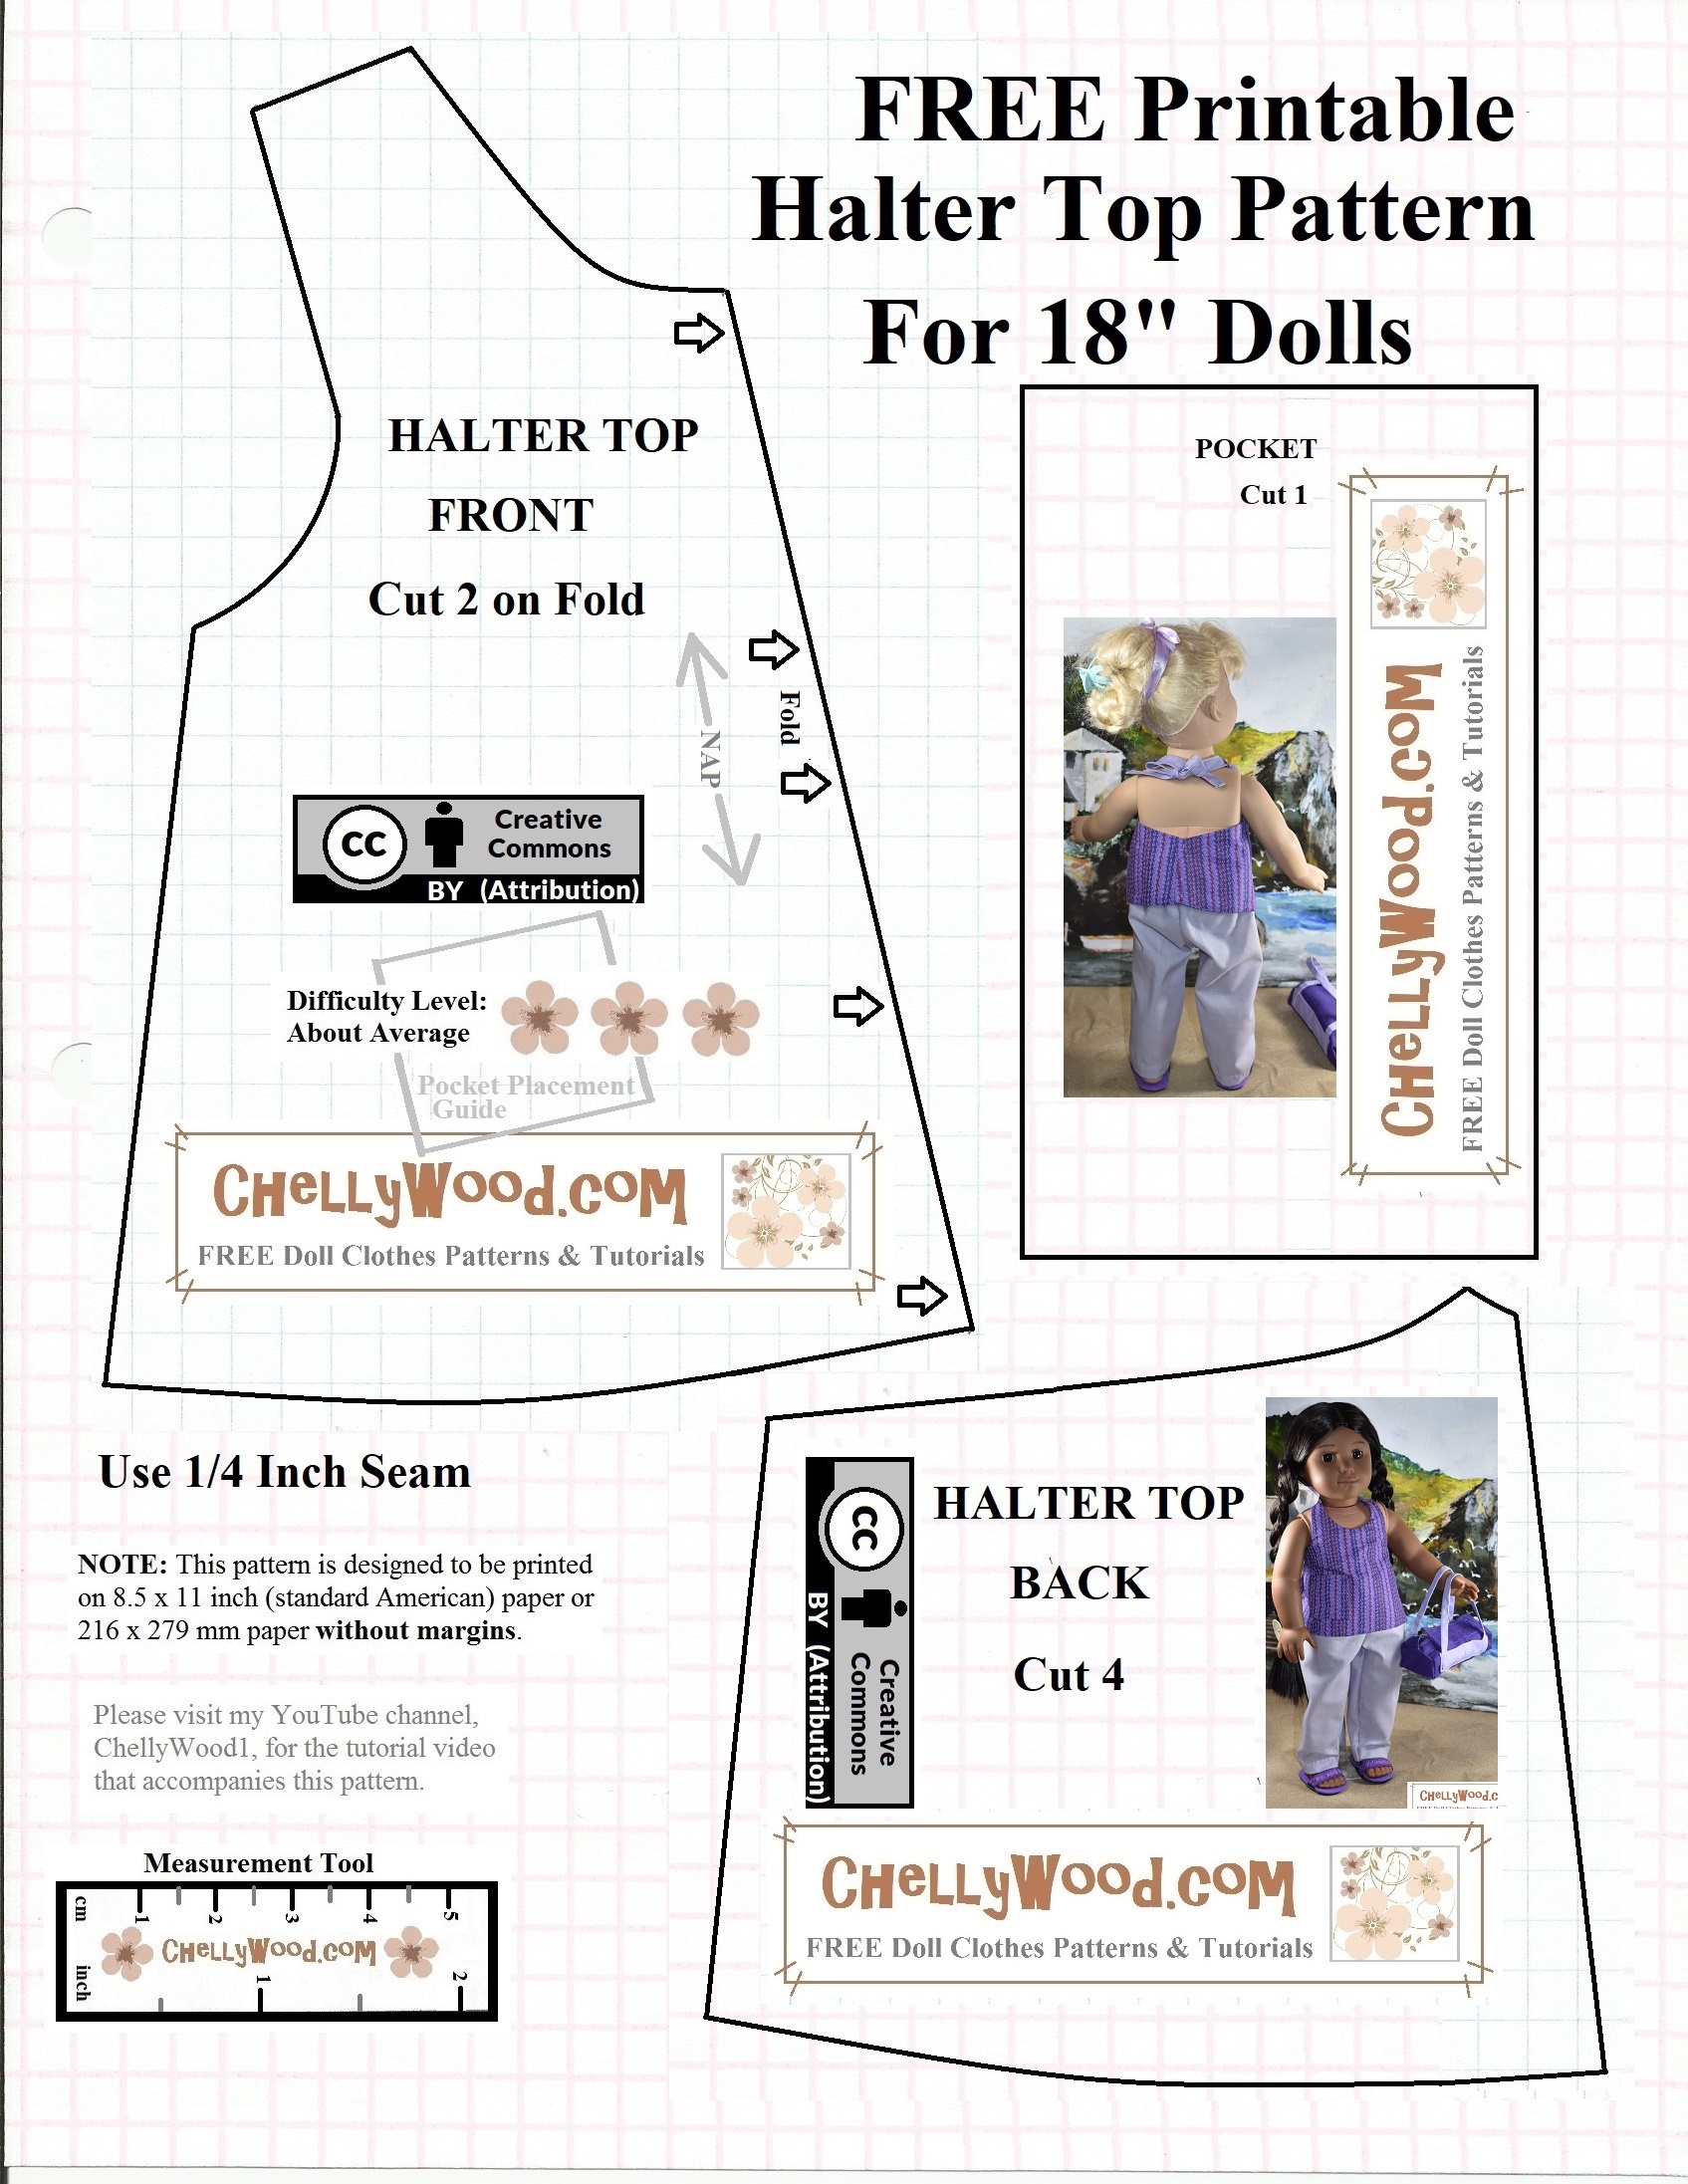 Free #agdoll Summer Shirt Pattern @ Chellywood #sewing 4#dolls - 18 Inch Doll Clothes Patterns Free Printable